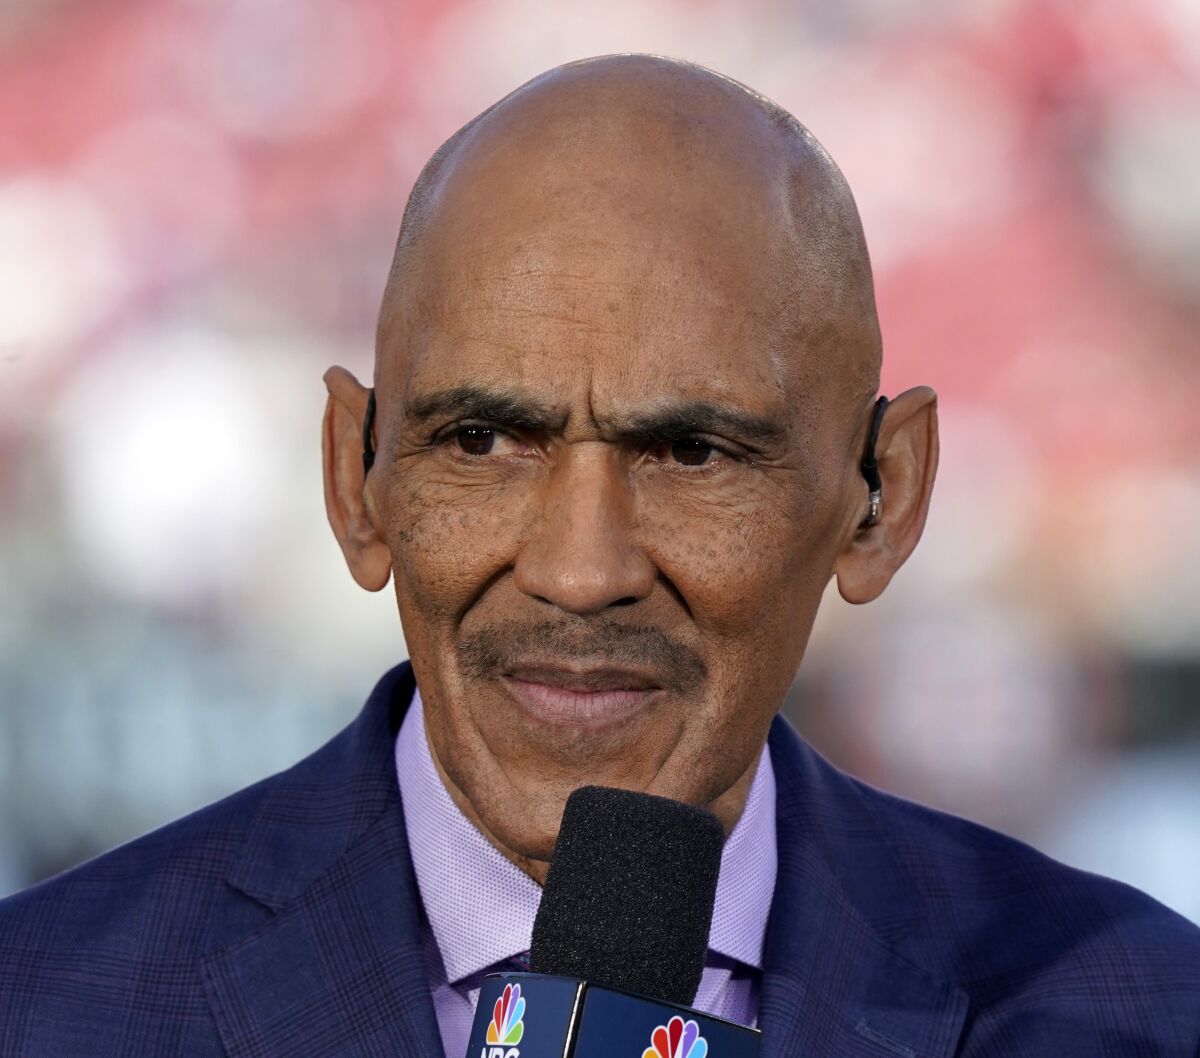 FILE - Tony Dungy looks on before an NFL divisional playoff football game between the San Francisco 49ers and the Minnesota Vikings, Saturday, Jan. 11, 2020, in Santa Clara, Calif. Hall of Fame coach Dungy learned long ago the need to know how to handle credit and blame. (AP Photo/Tony Avelar, File)